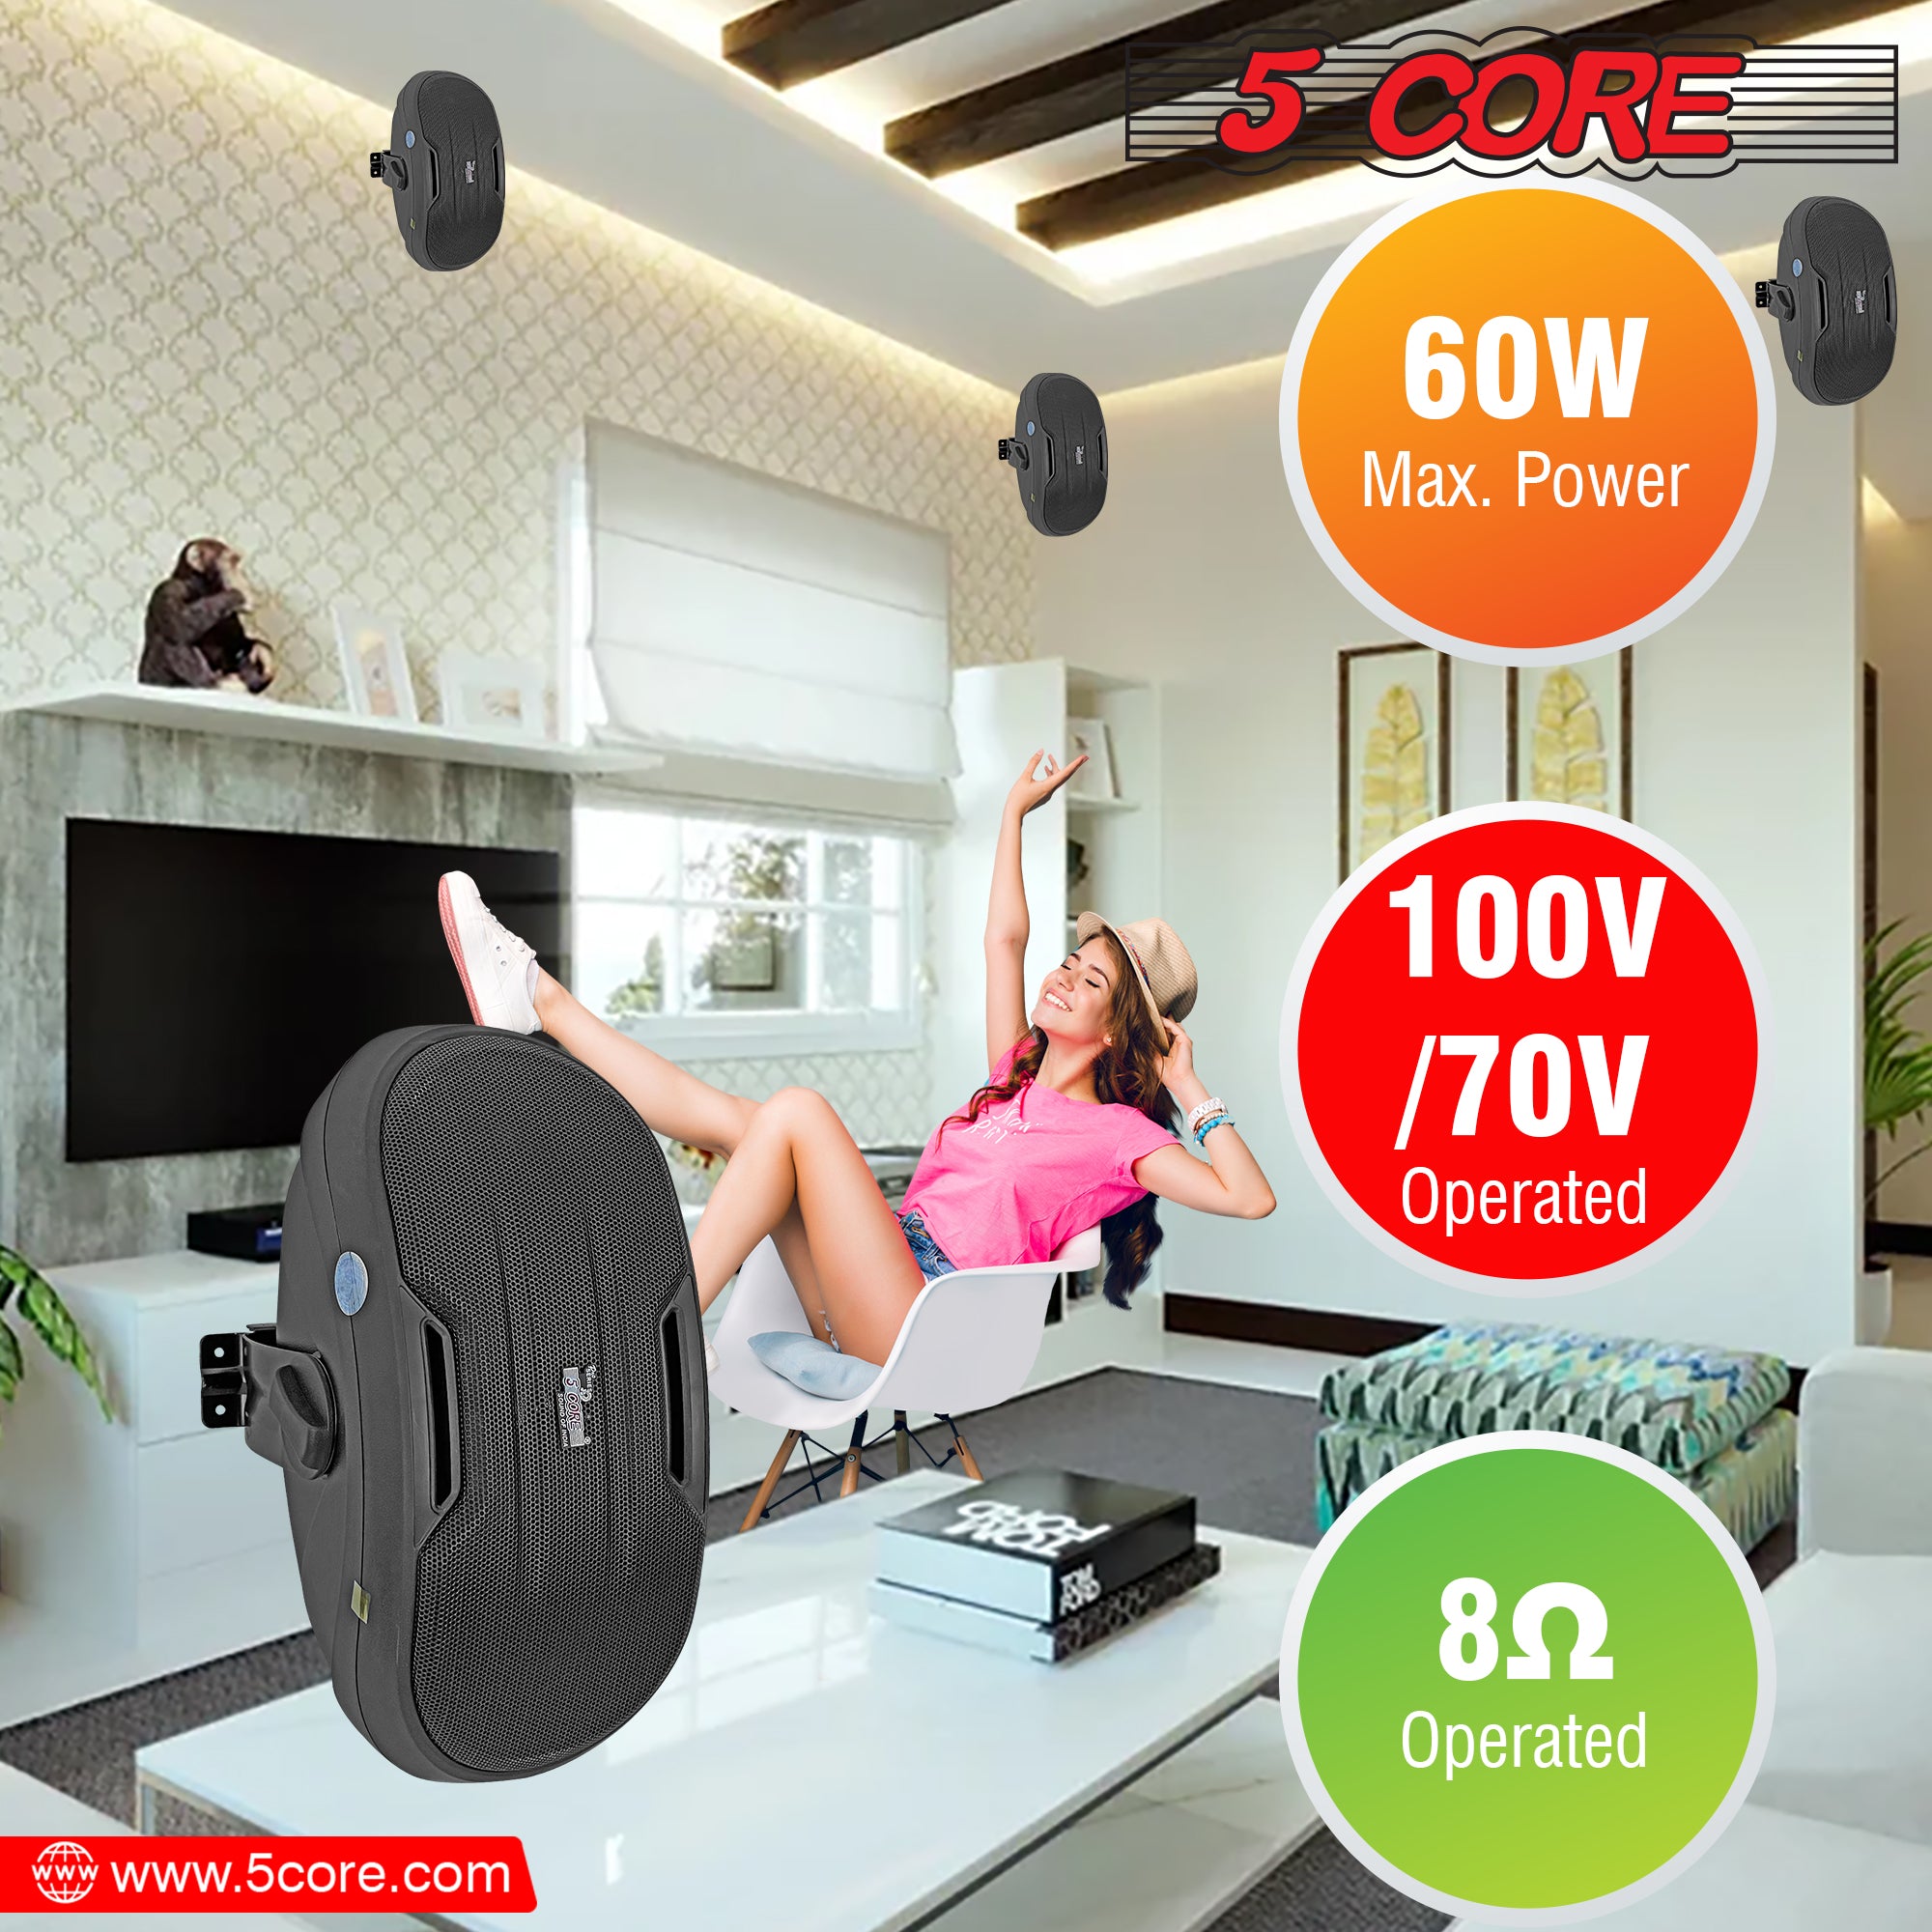 5 Core Wall Speaker System • 100W PMPO Mini Box Ceiling Mount Speakers • Heavy Duty ABS Enclosure